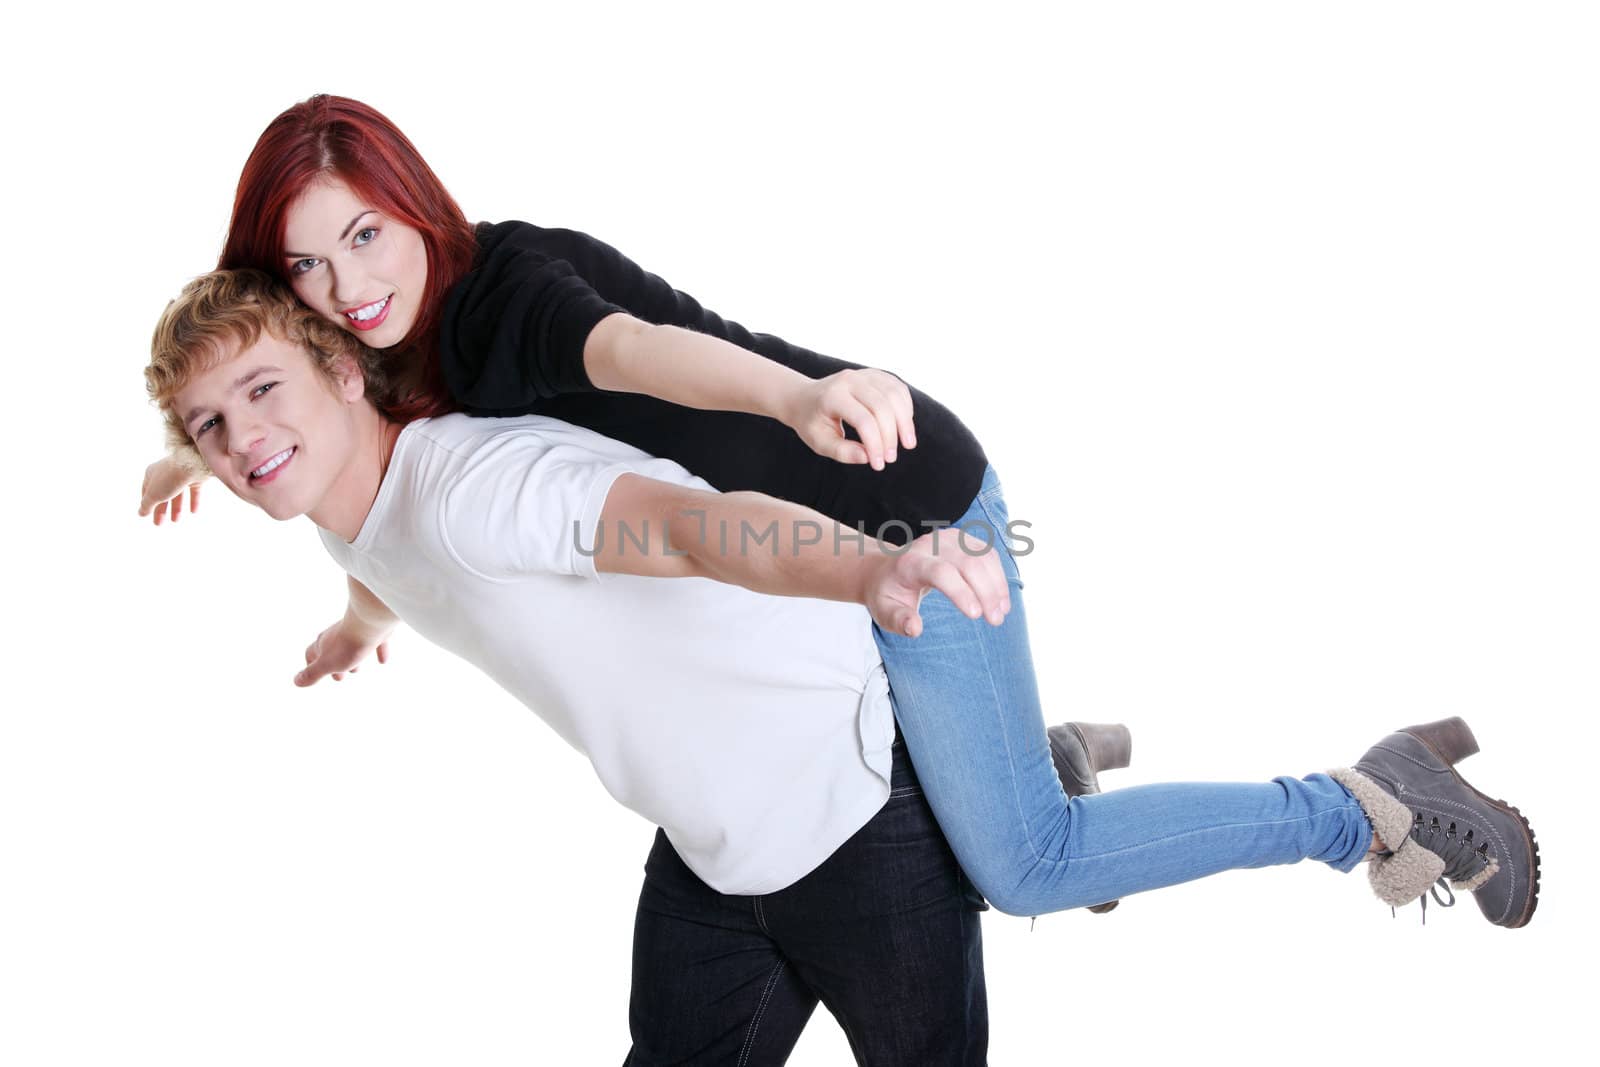 Young beautiful smiling couple having fun together with piggyback ride and arms outstretched. Isolated on white background.